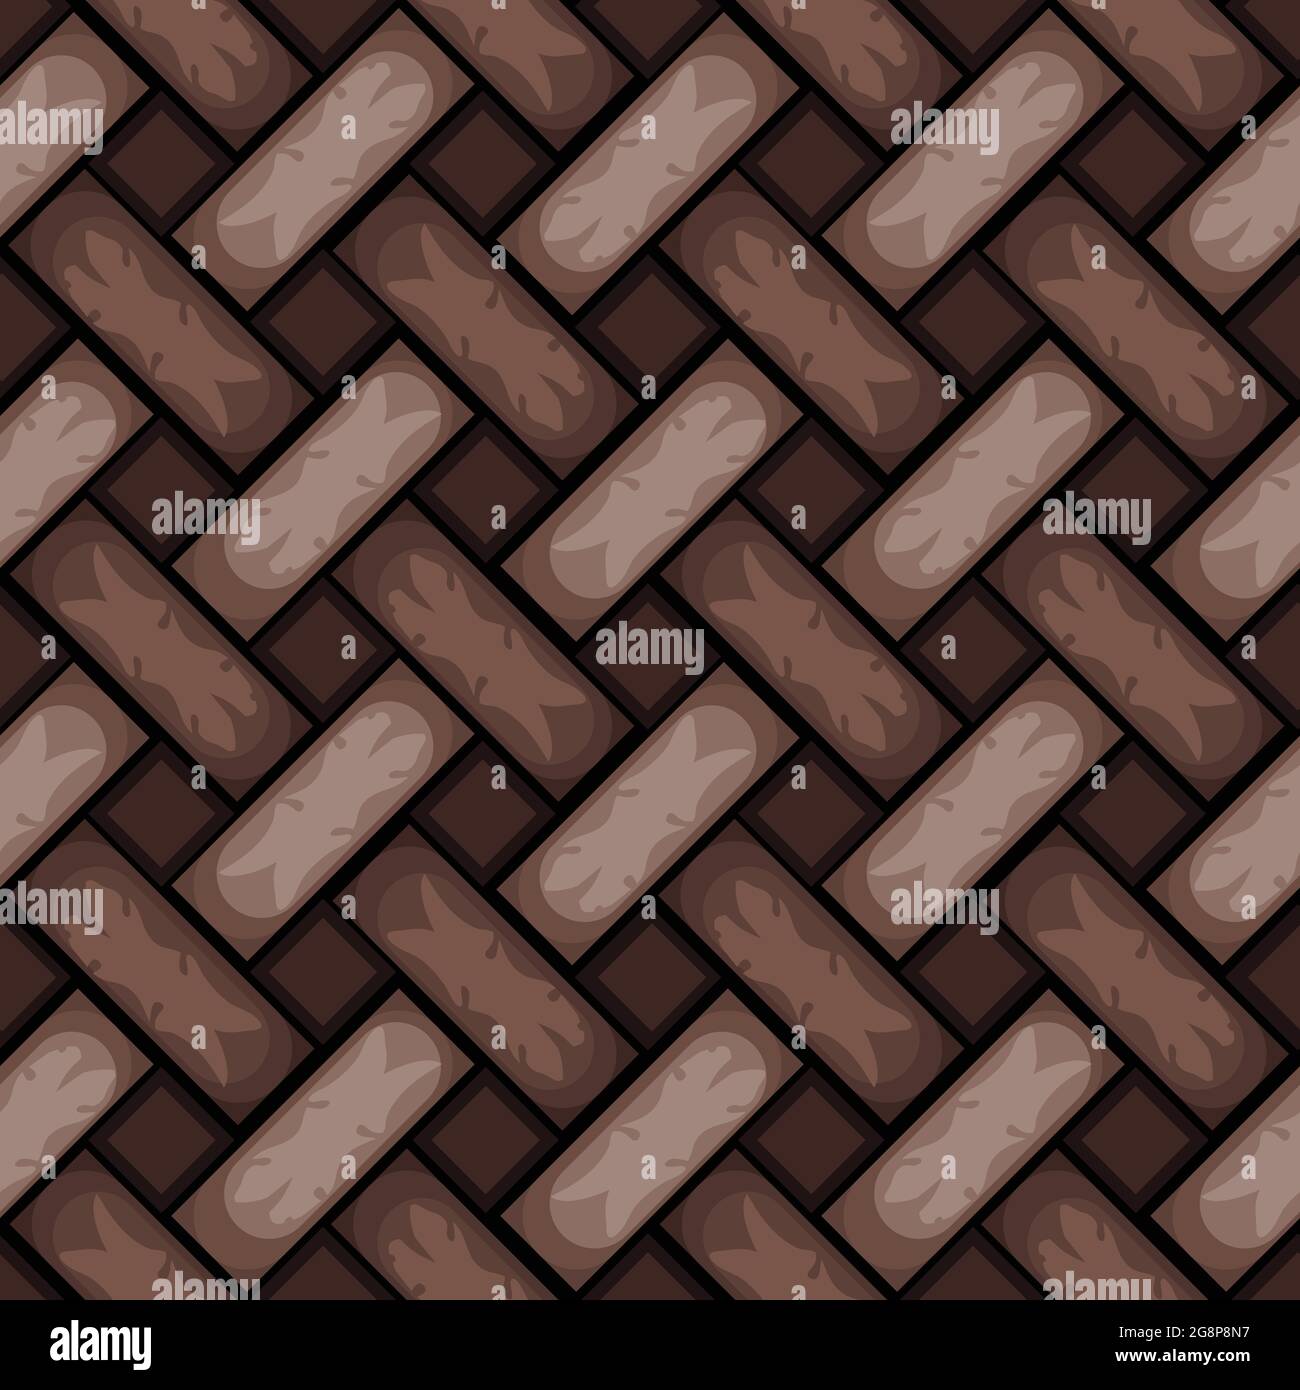 Seamless vector pattern texture with brown braiding. Repeat wallpaper design with knitted braid. Effective fabric material. Stock Vector